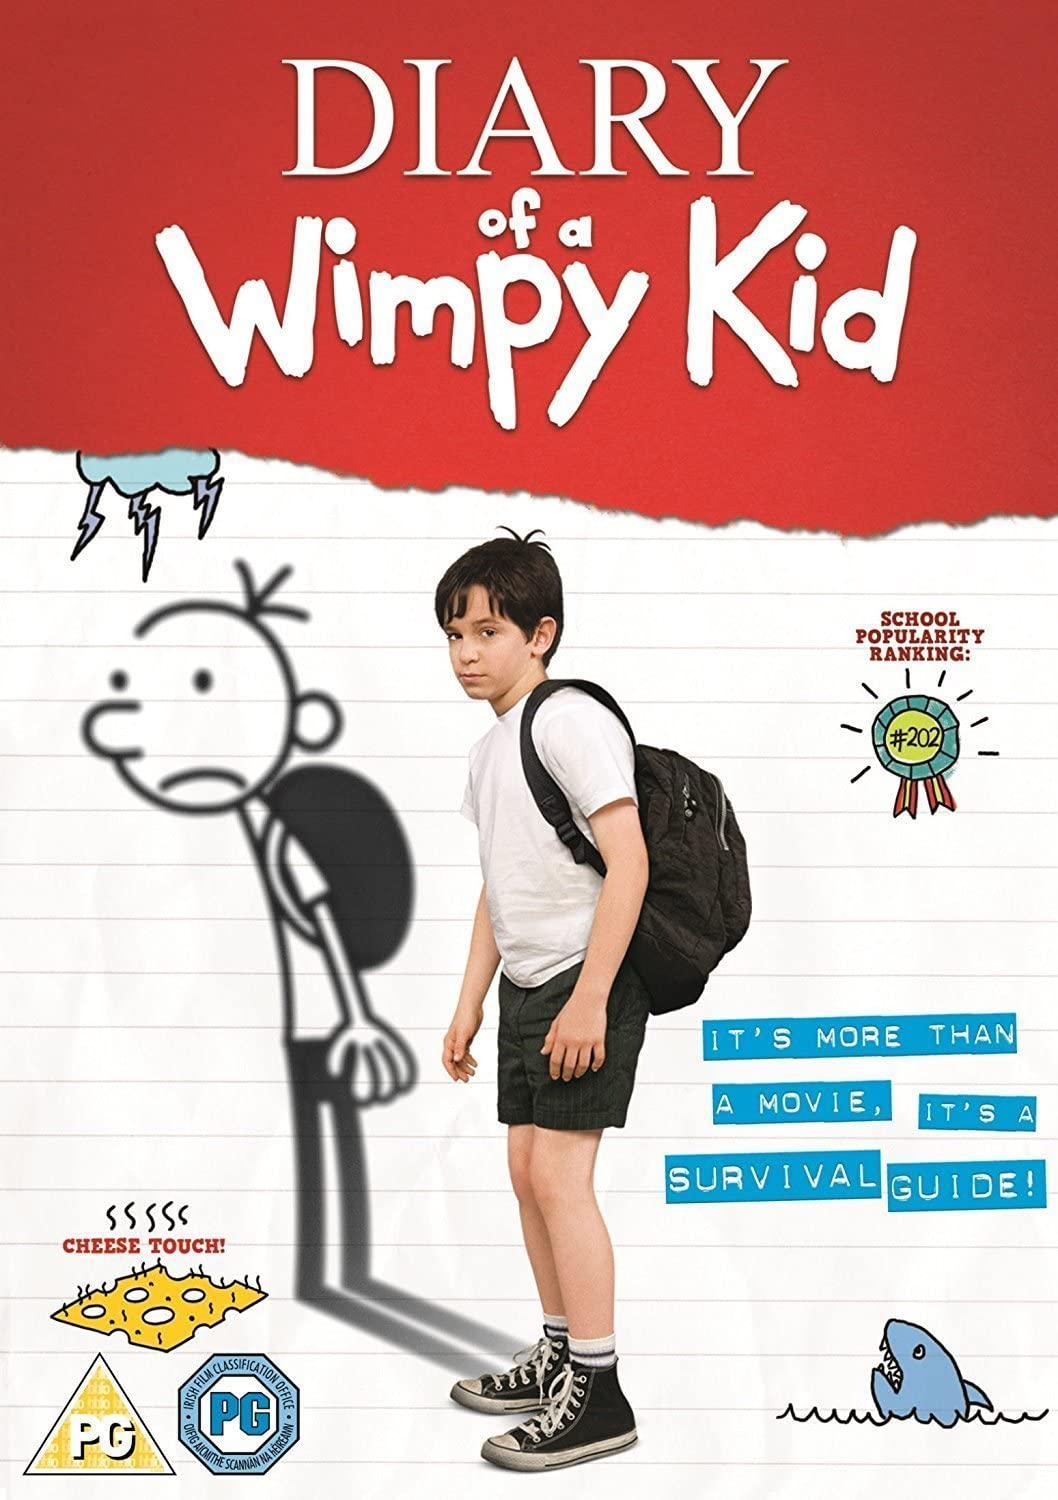 Diary Of A Wimpy Kid - Family/Comedy [DVD]